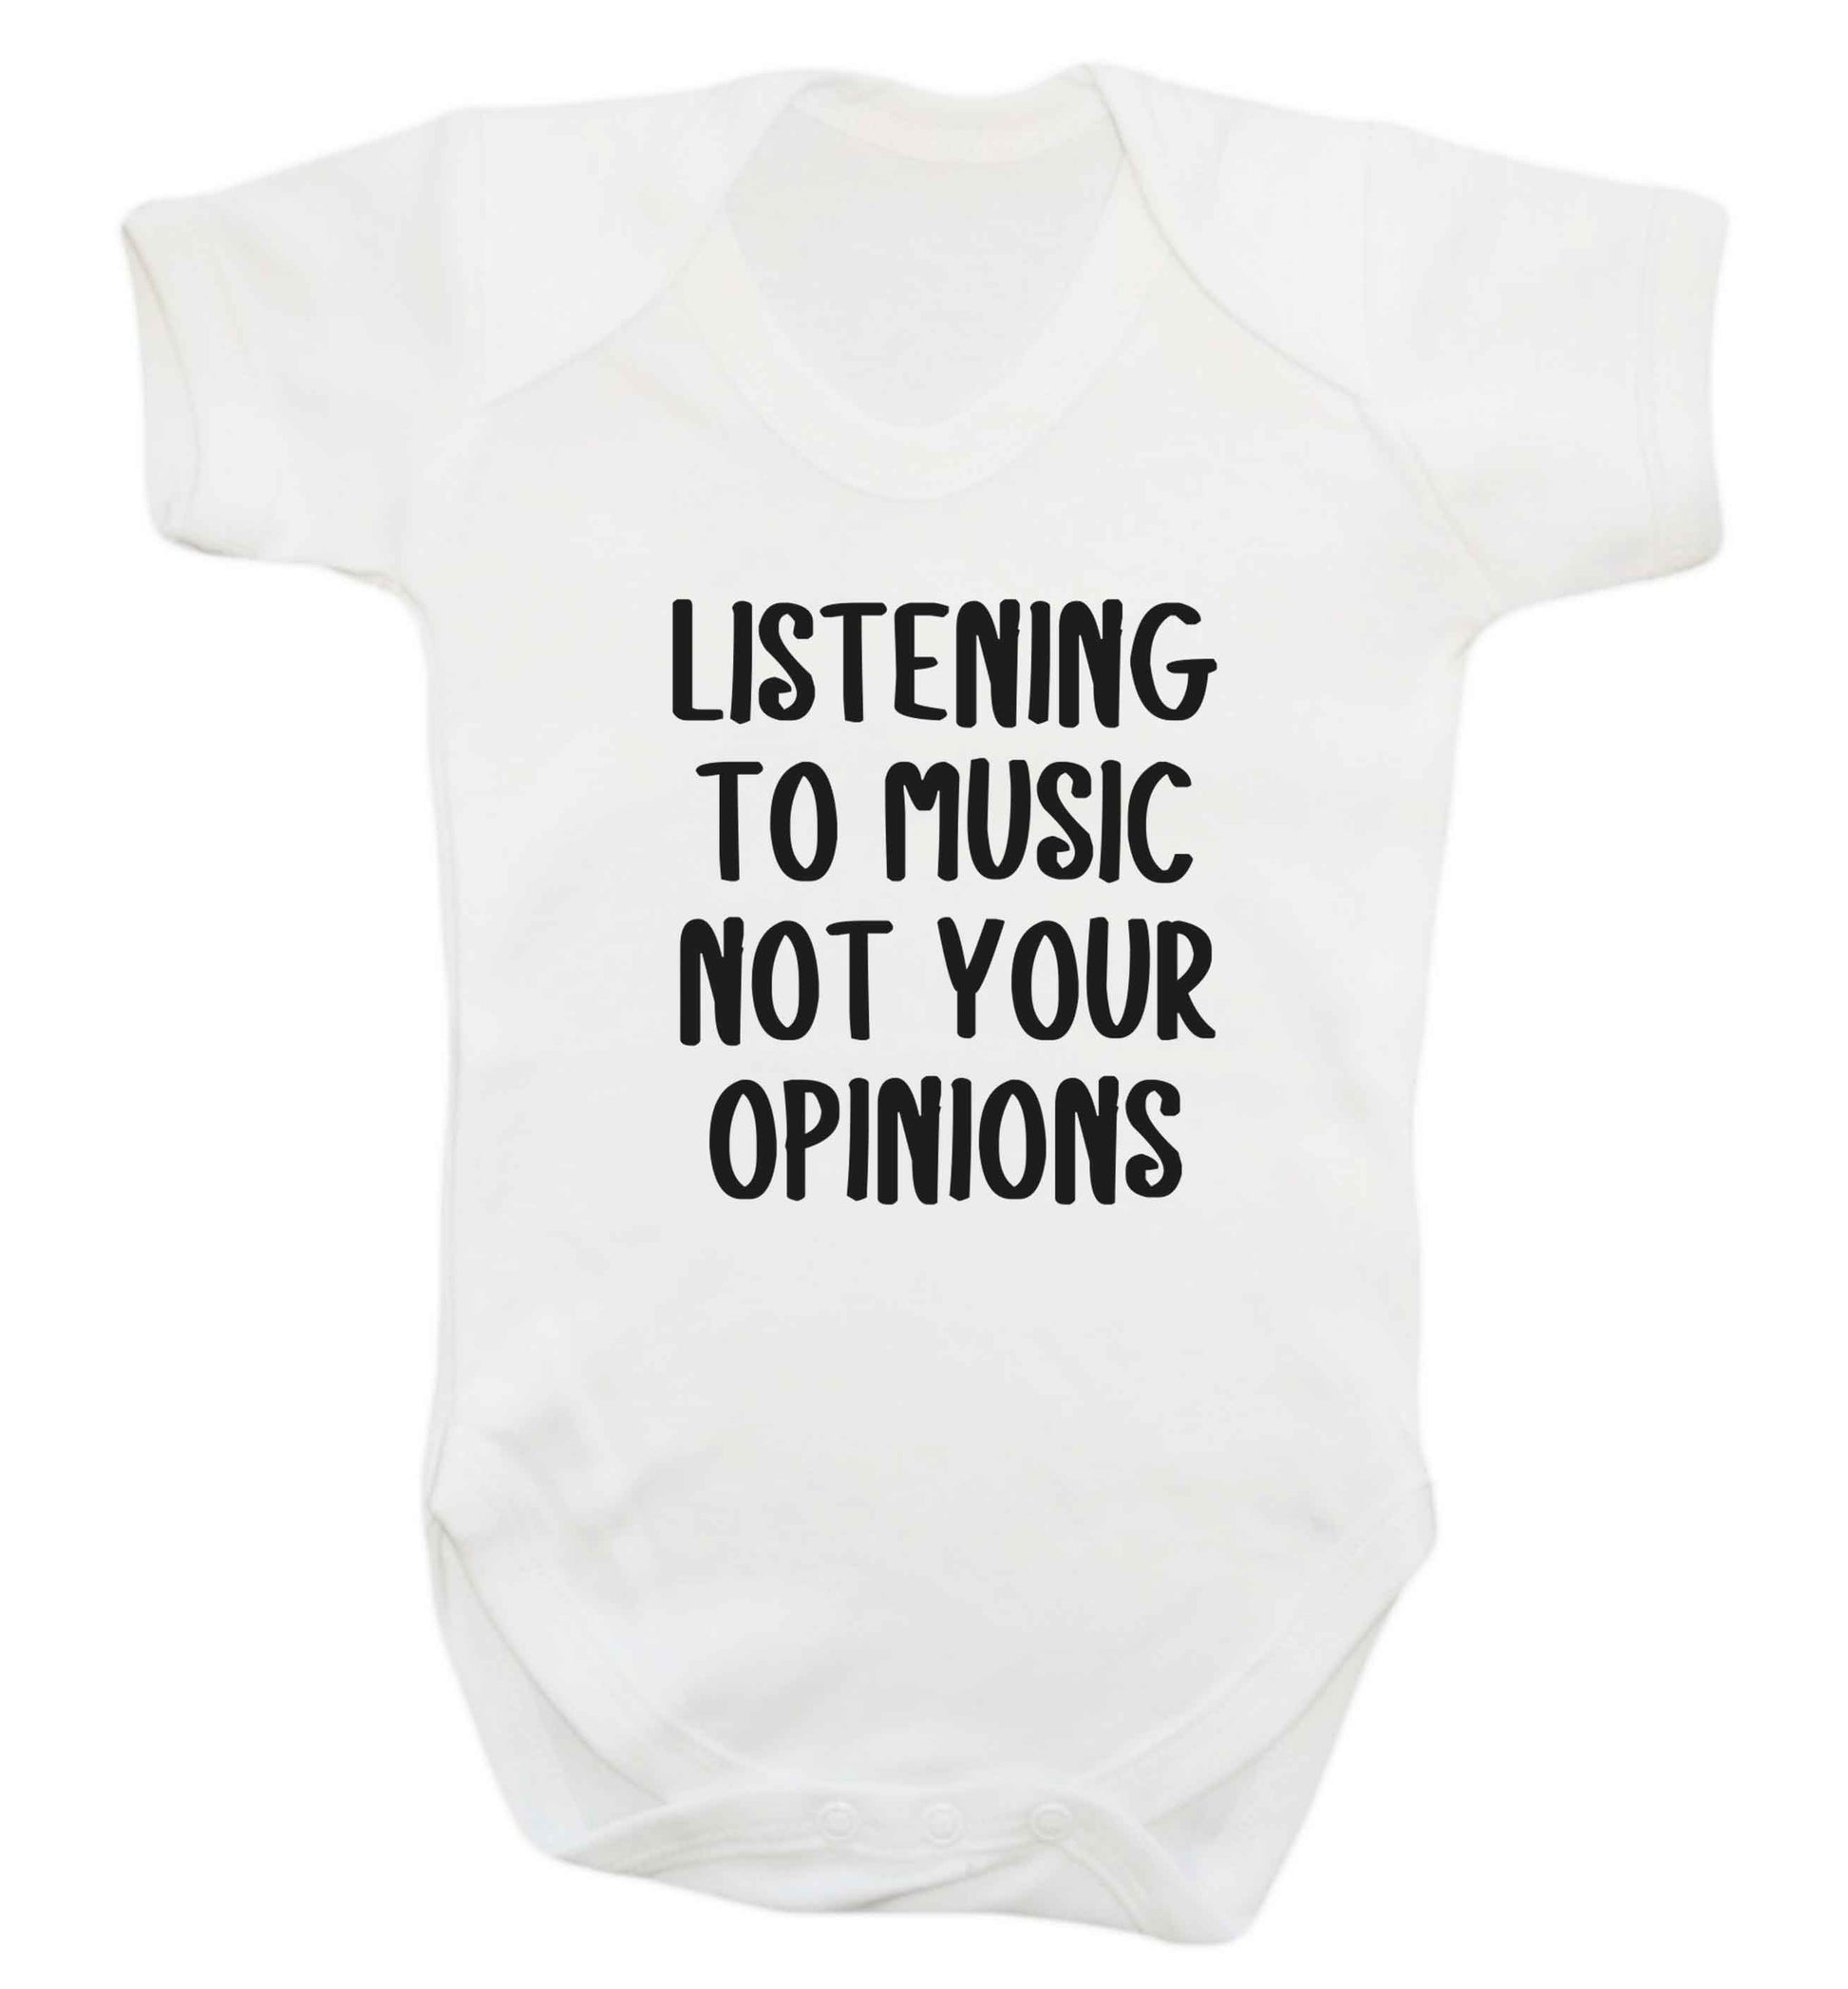 Listening to music not your opinions baby vest white 18-24 months